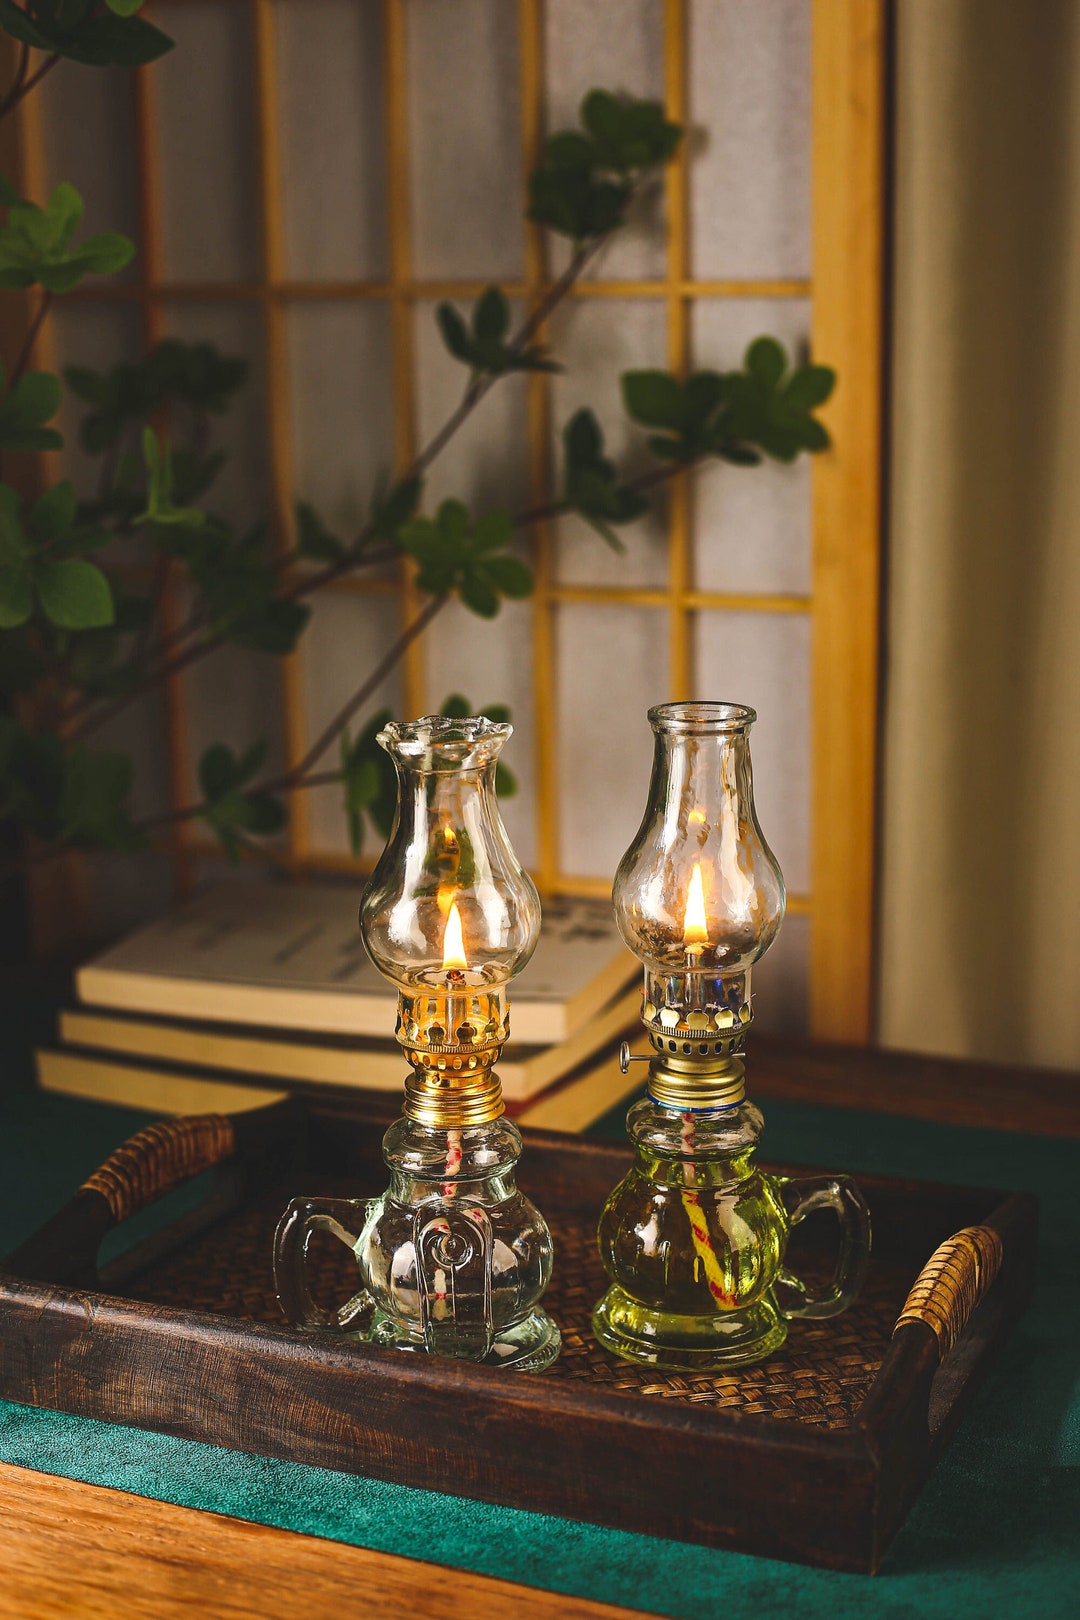 10.5 FL OZ/300ML Oil Lamps for Indoor Use With Fire Control Knob, Kerosene  Lamps / Lanterns, Hurricane Lamp With Adjustable Fire Wick 